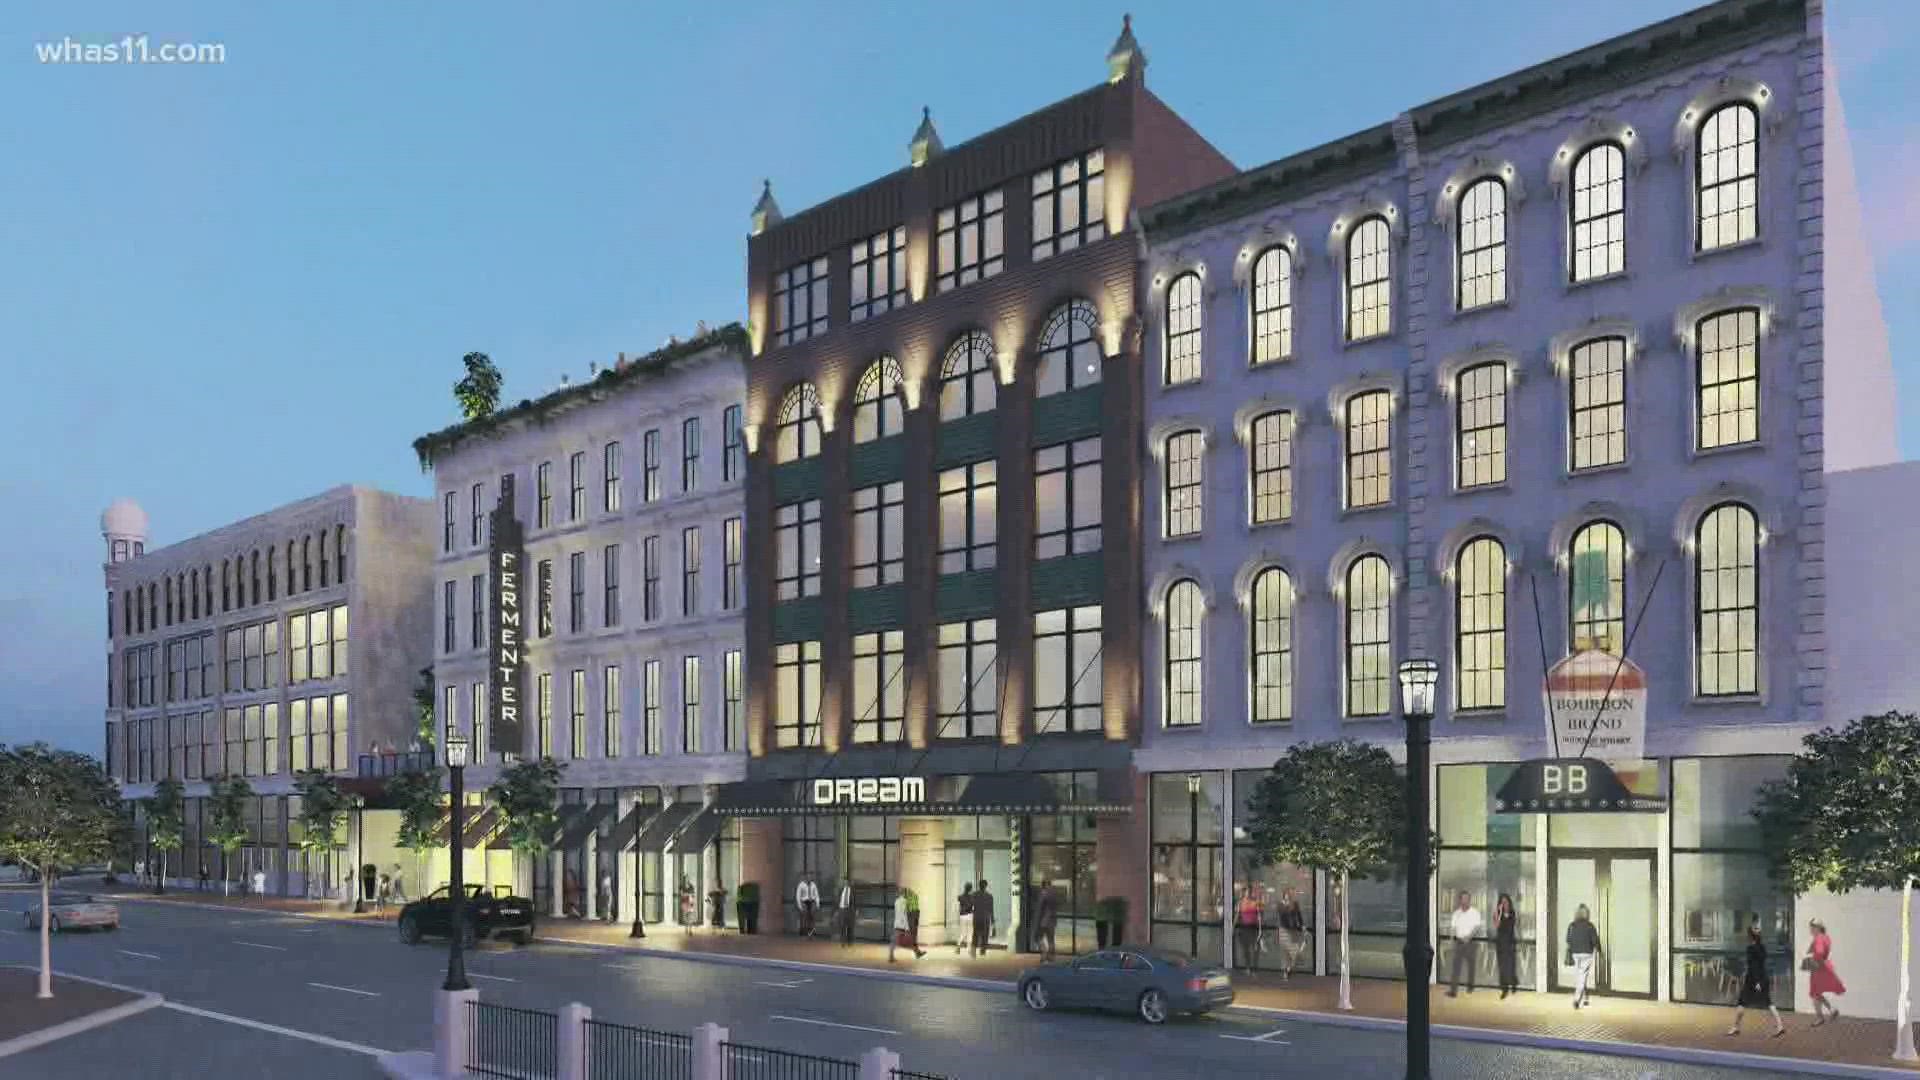 The hotel will consist of seven historic buildings and their facades and is expected to open in 2025.